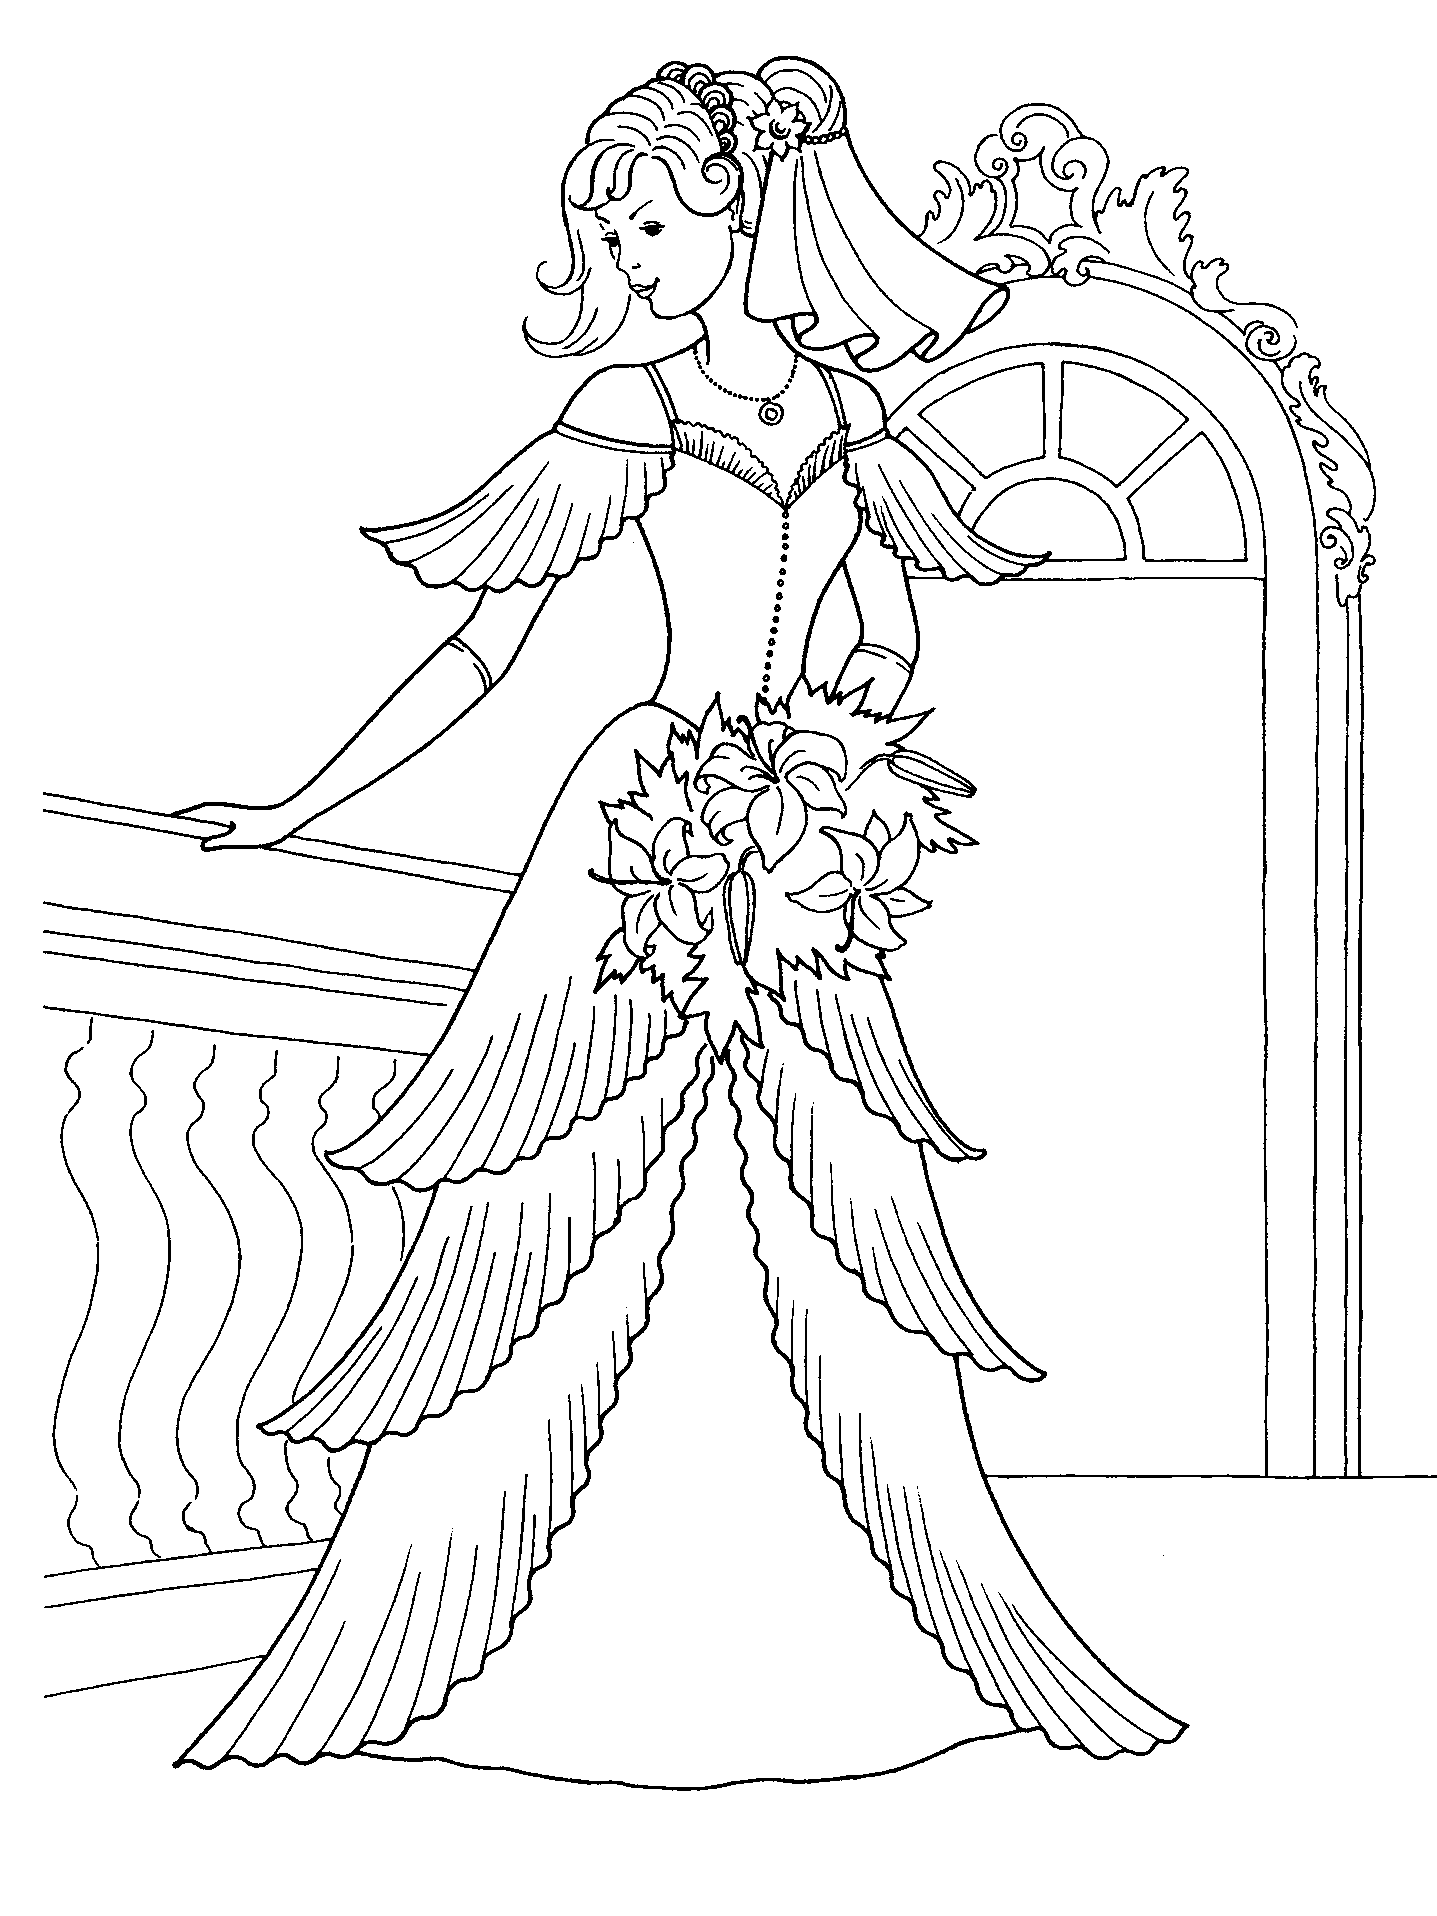 wedding-coloring-pages-3-coloring-kids-coloring-kids